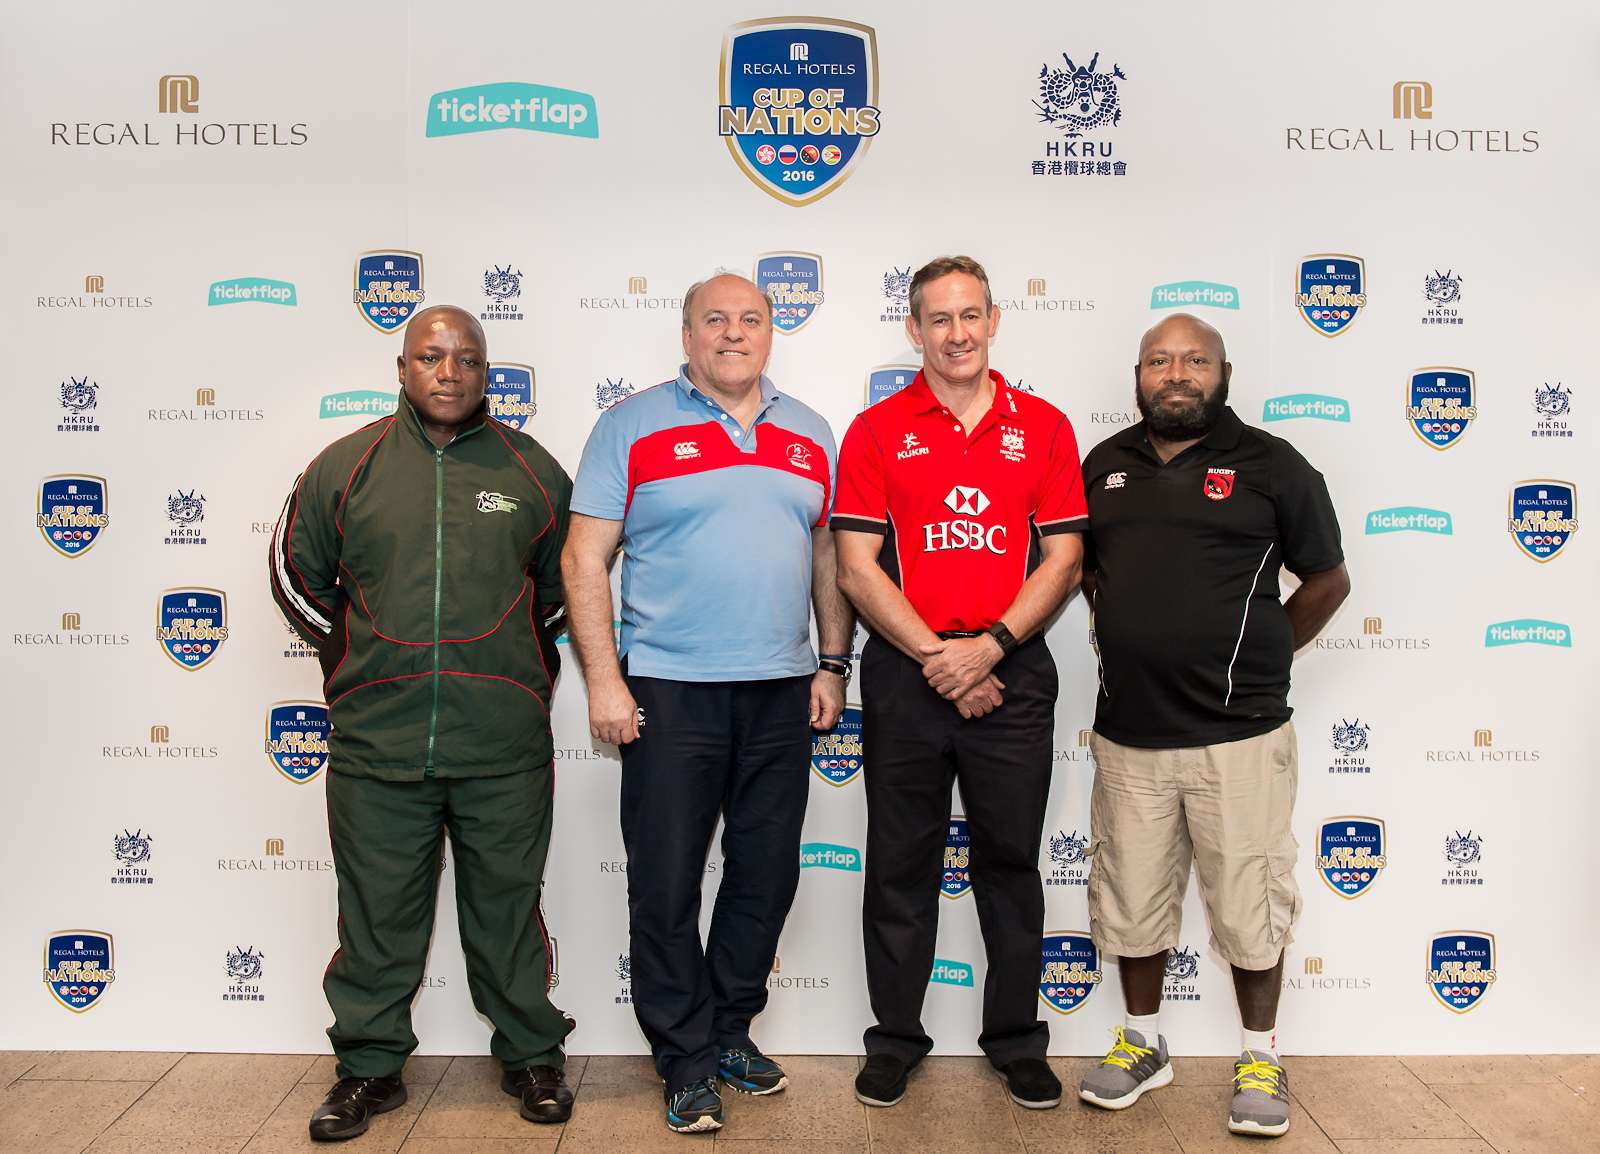 Zimbabwe coach Cypren Mandenge, Russia coach Aleksandr Pervukhin, Hong Kong coach Leigh Jones and Papua New Guinea coach Sydney Wesley at the Cup of Nations launch. Photos: SCMP Pictures